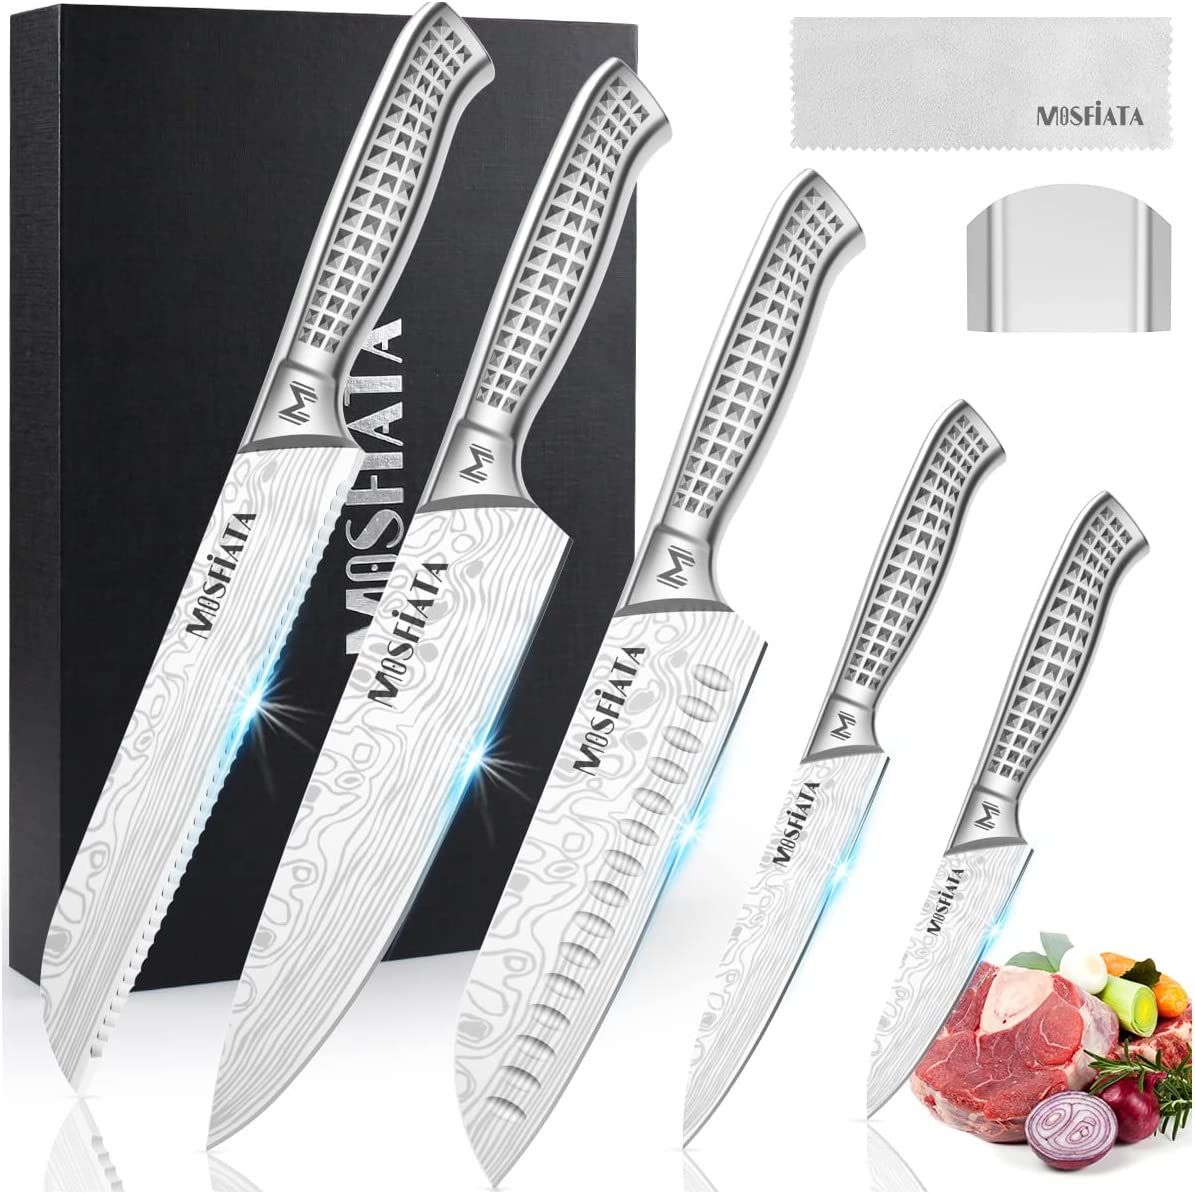 MOSFiATA 7 Piece Kitchen Knife Set, Ultra Sharp Knife Set with High Carbon Stainless Steel Handle, Knives Set for Kitchen, Chef Knife Set Come with Gift Box